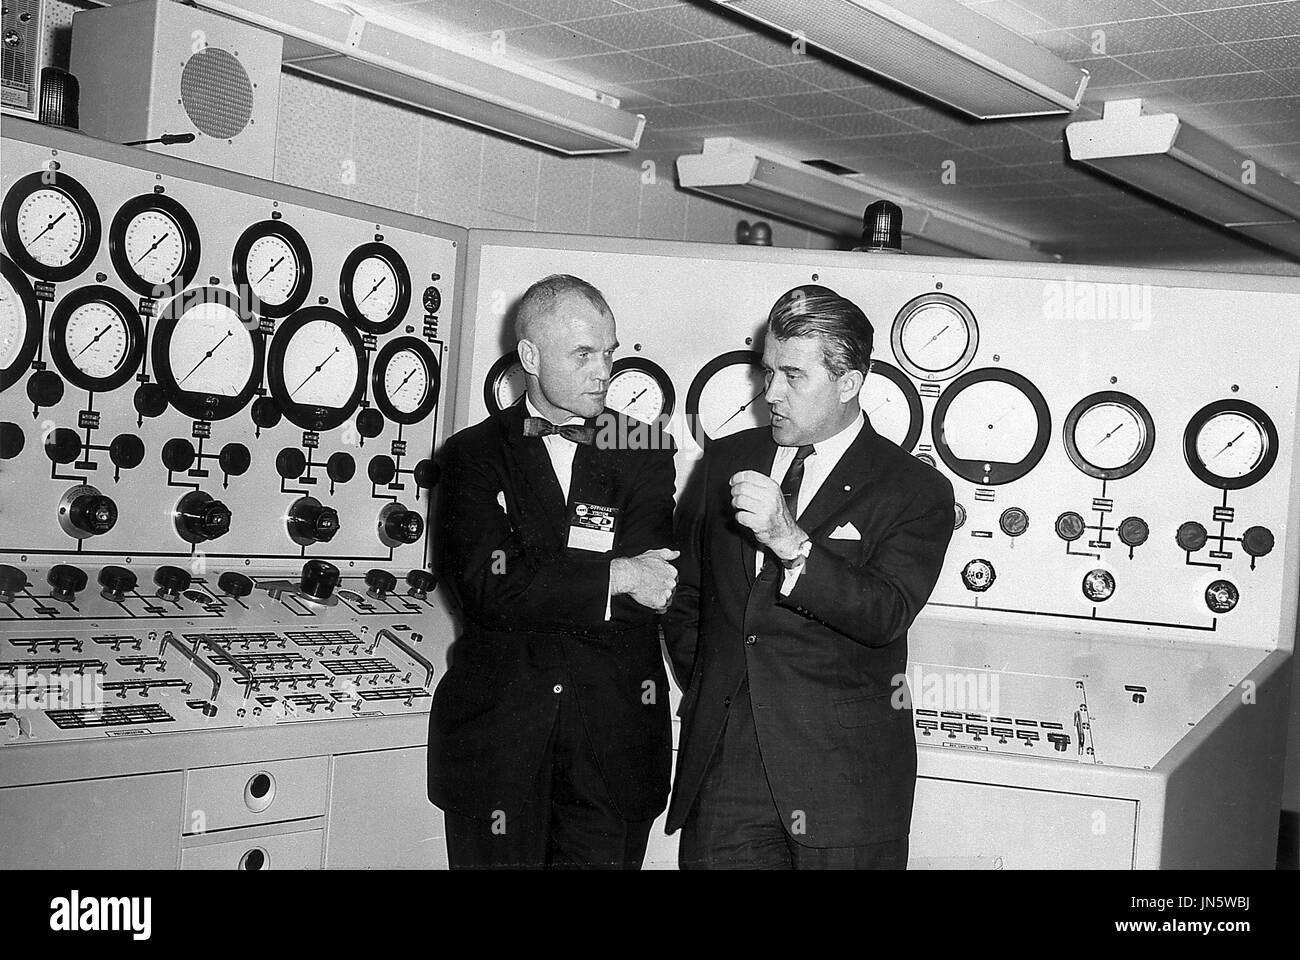 Dr. Wernher von Braun, right, briefs Astronaut John Glenn, left, in the control room of the Vehicle Test Section, Quality Assurance Division, Marshall Space Flight Center (MSFC) in Huntsville, Alabama, November 28, 1962..Credit: NASA via CNP Stock Photo